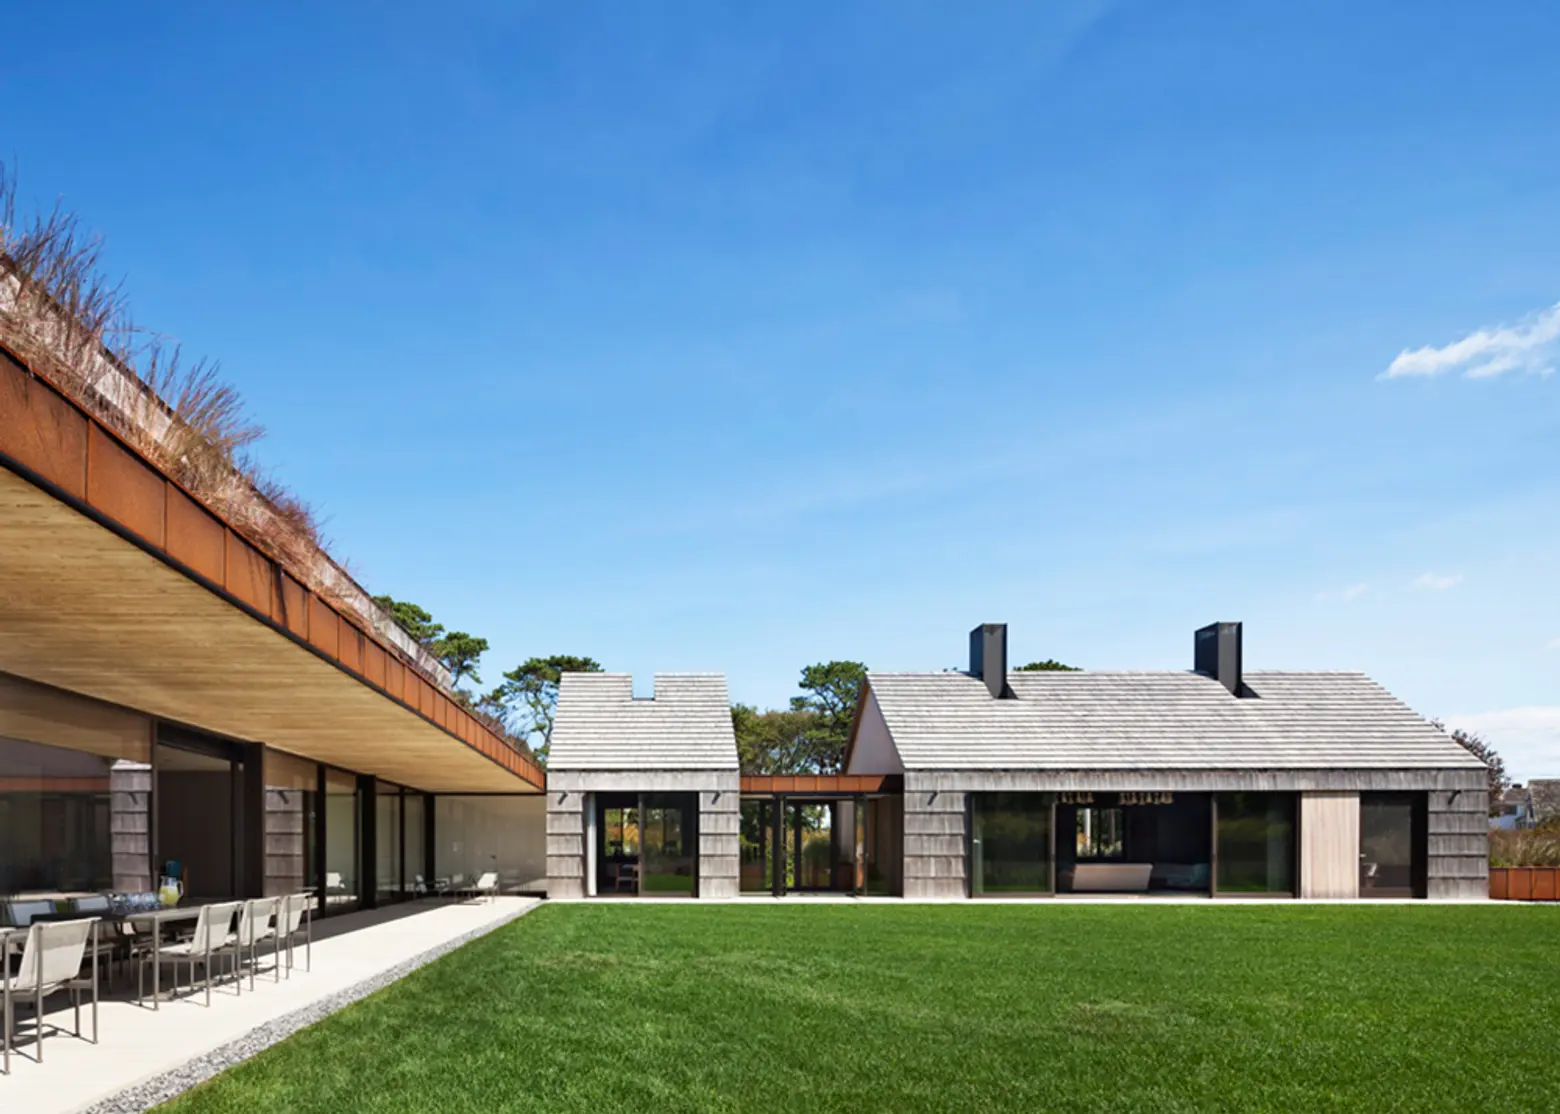 Bates Masi + Architects’ Potato Barn-Inspired Luxury Home Blends With the Landscape